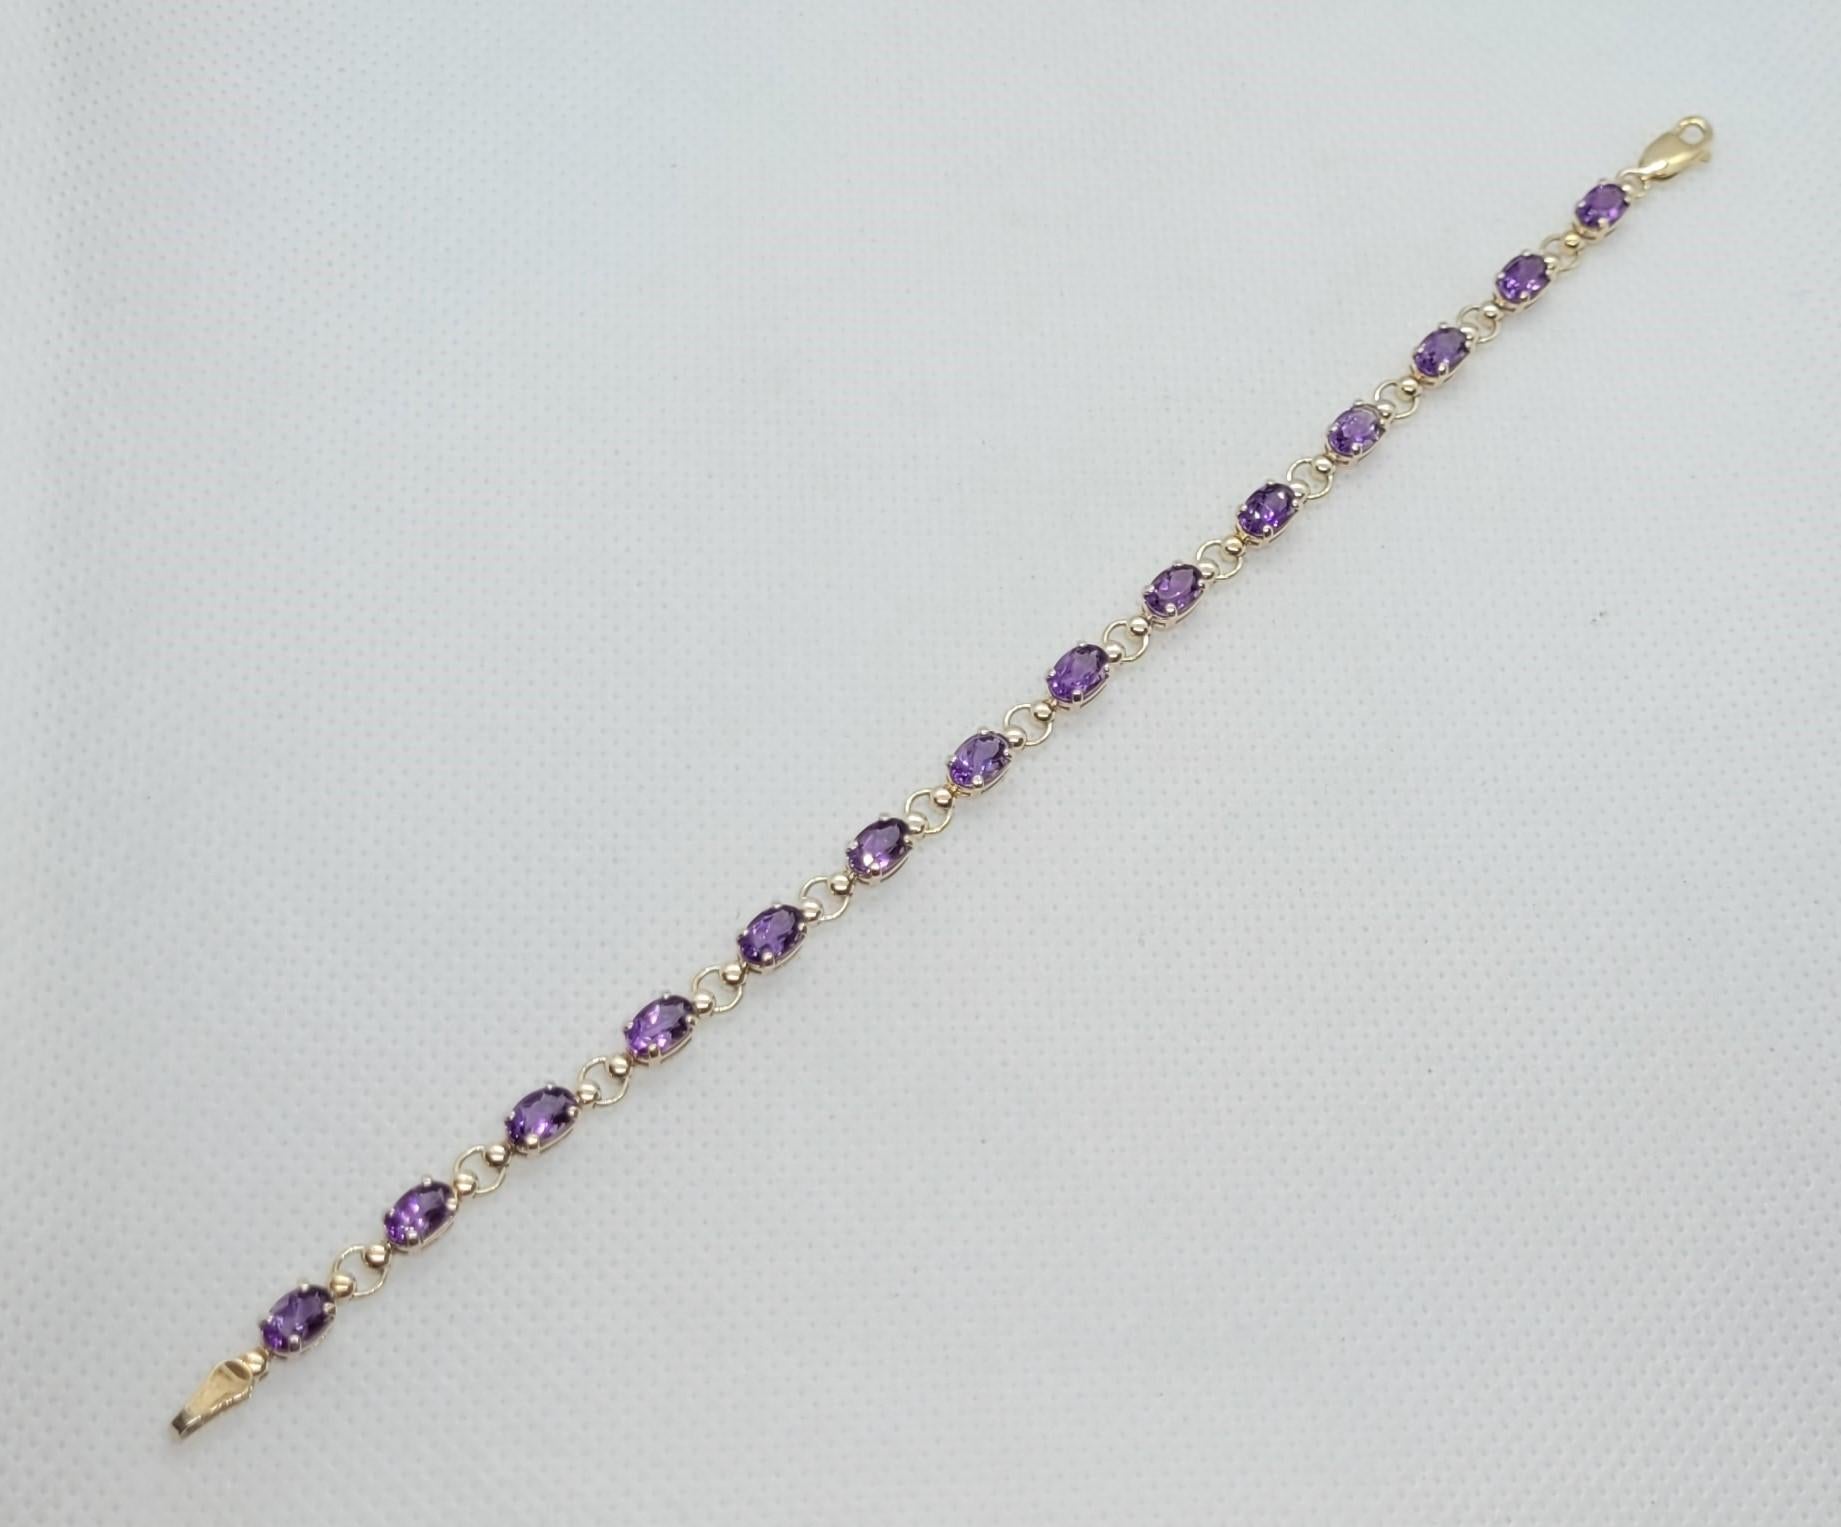 Yellow Gold Amethyst Bracelet, 6 x 4 mm Oval Amethyst, 10kt Gold, 7.25 Inches For Sale 1